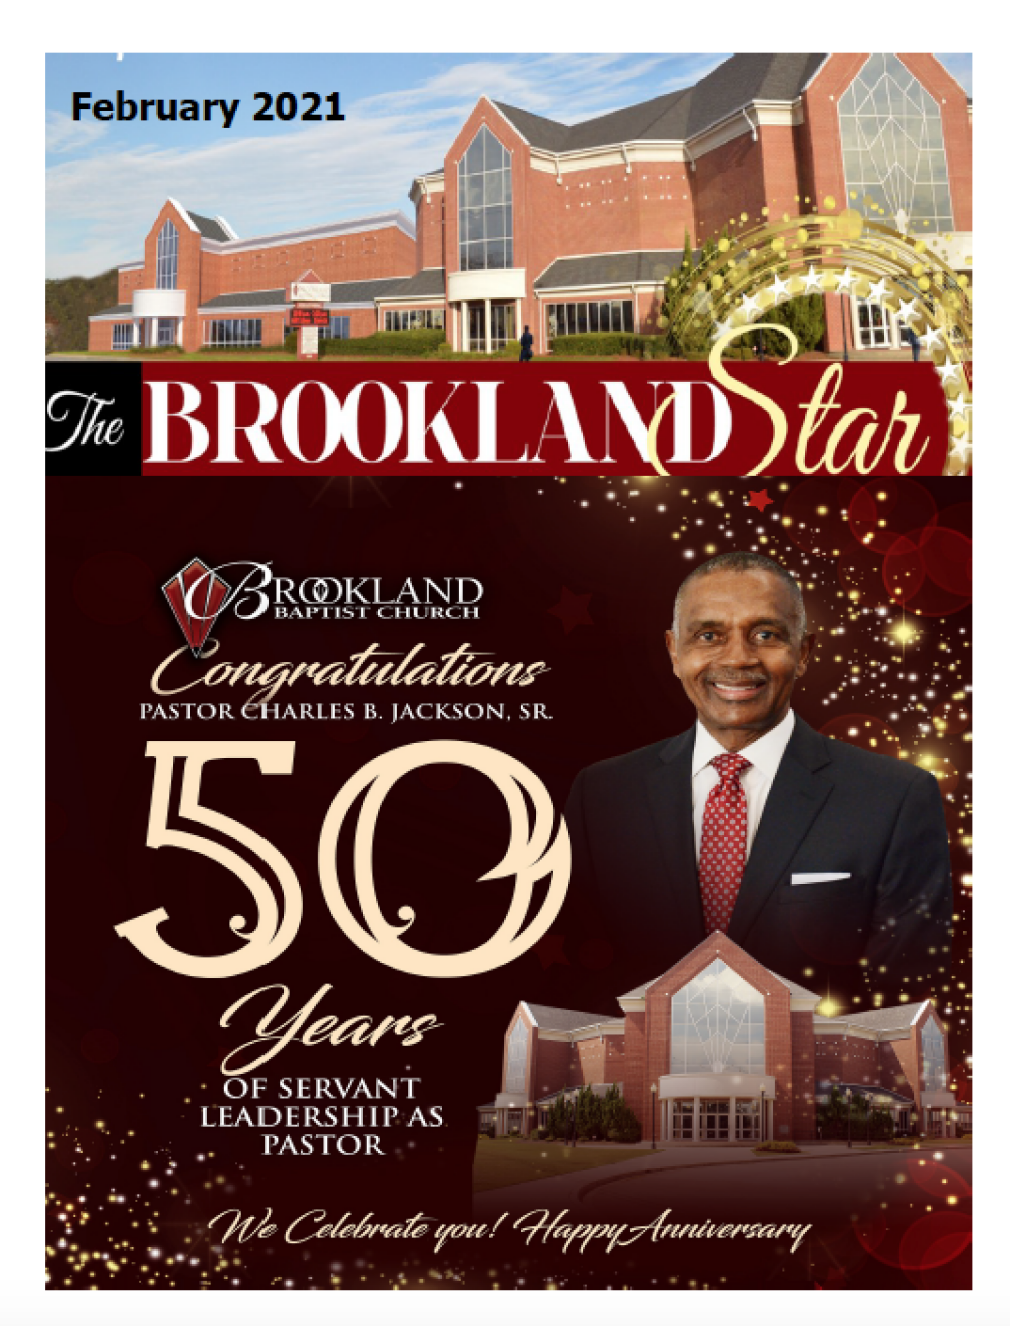 The Brookland Star February Edition 2021